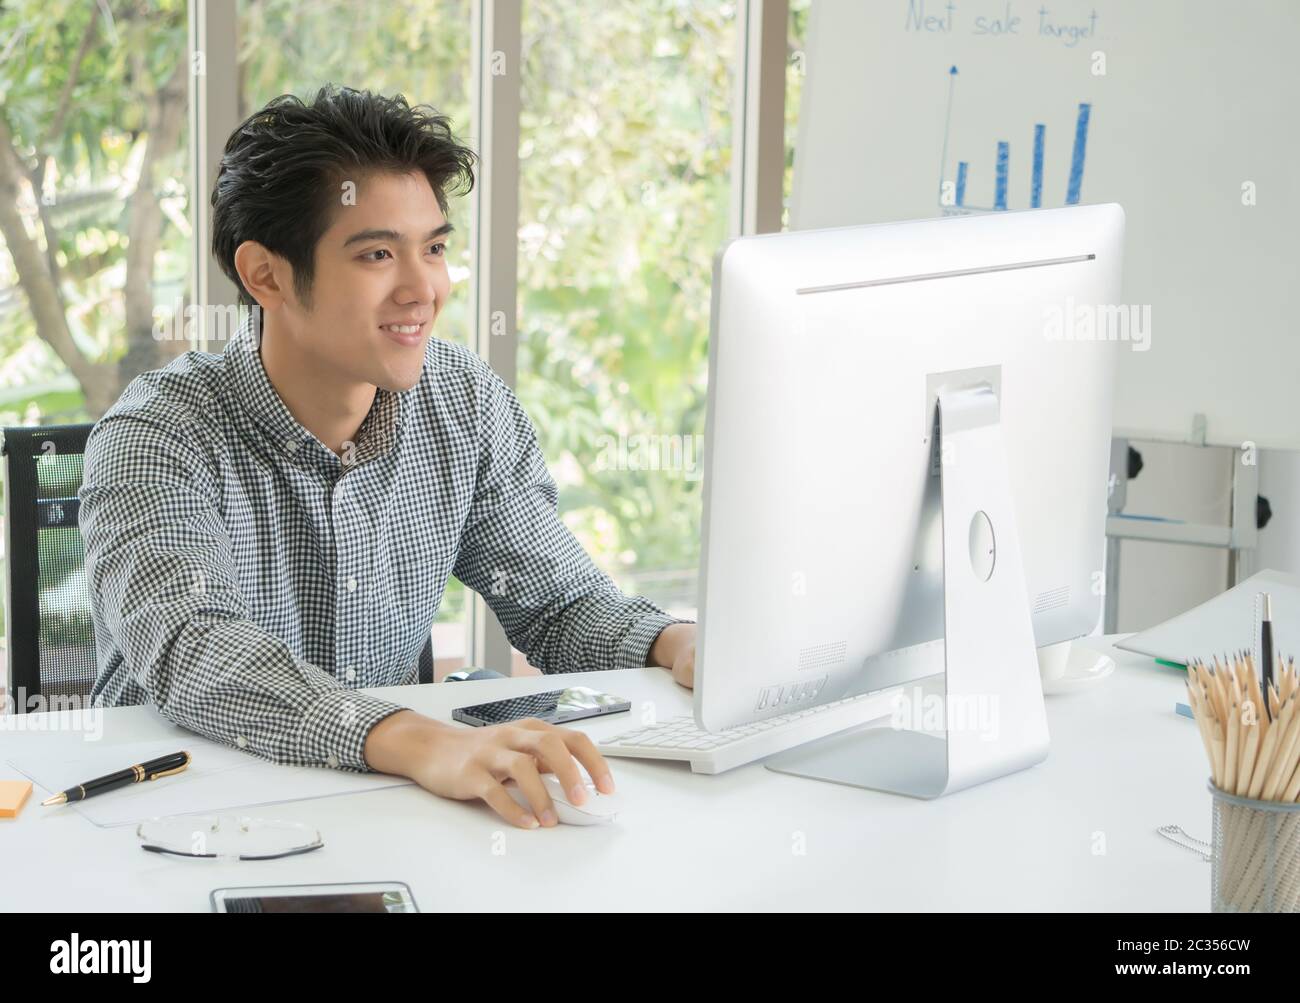 The handsome Asian man, aged 25-35, is sitting at the desk and smiling happily. He is the head of marketing. He monitors sales on the computer screen. Stock Photo